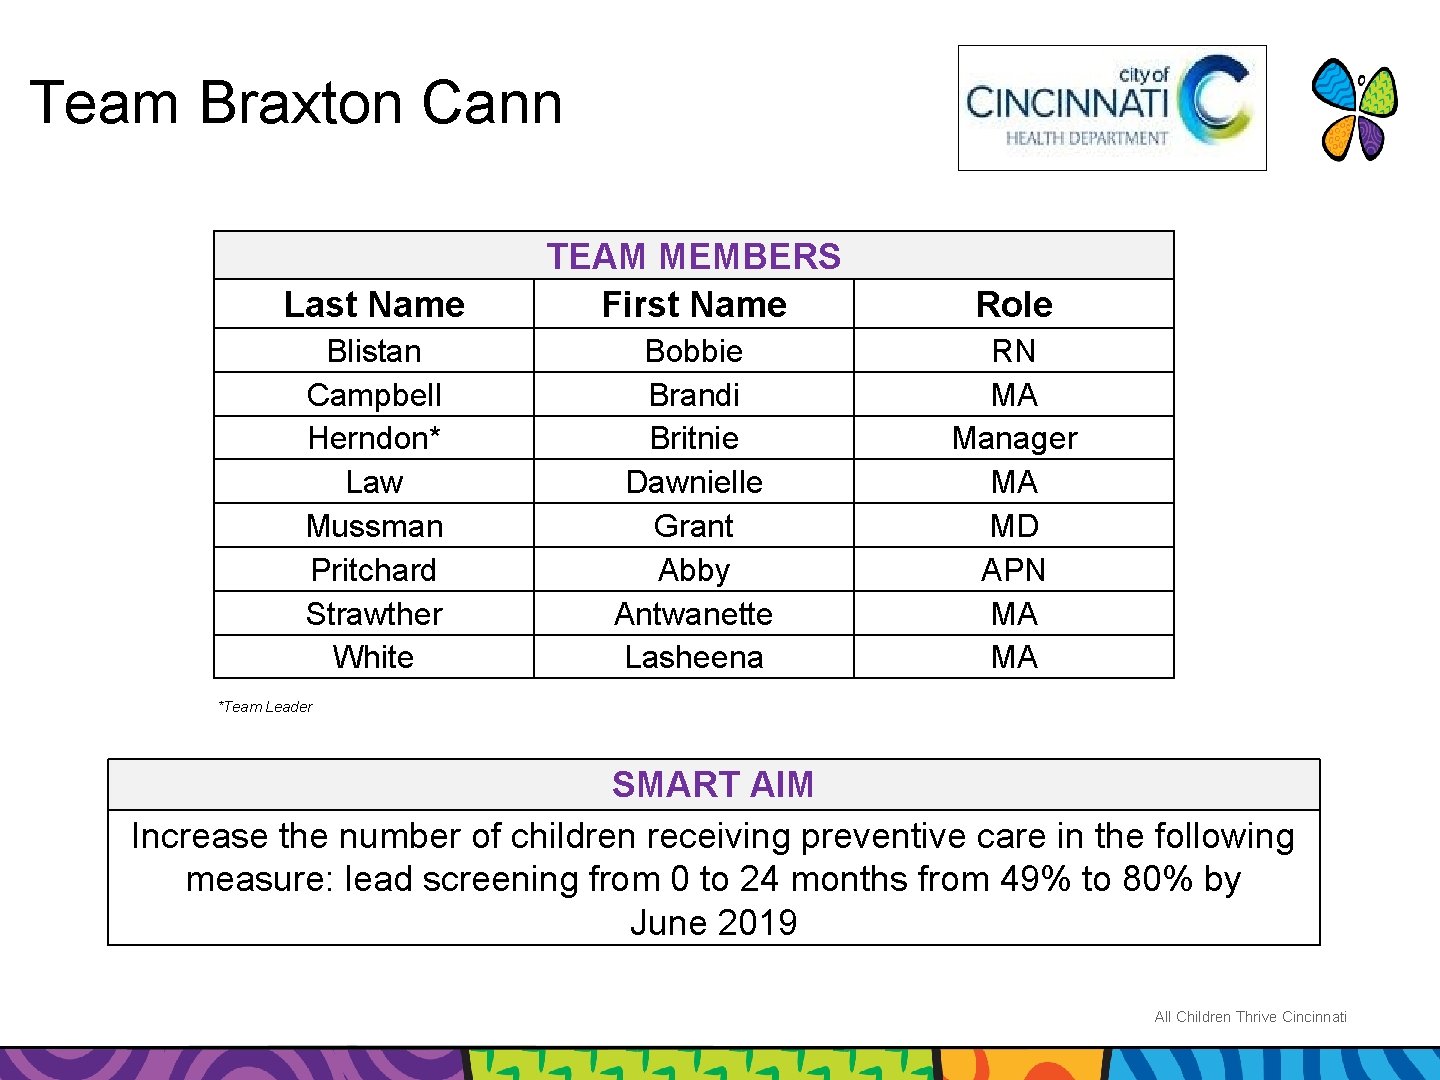 Team Braxton Cann Last Name TEAM MEMBERS First Name Role Blistan Campbell Herndon* Law